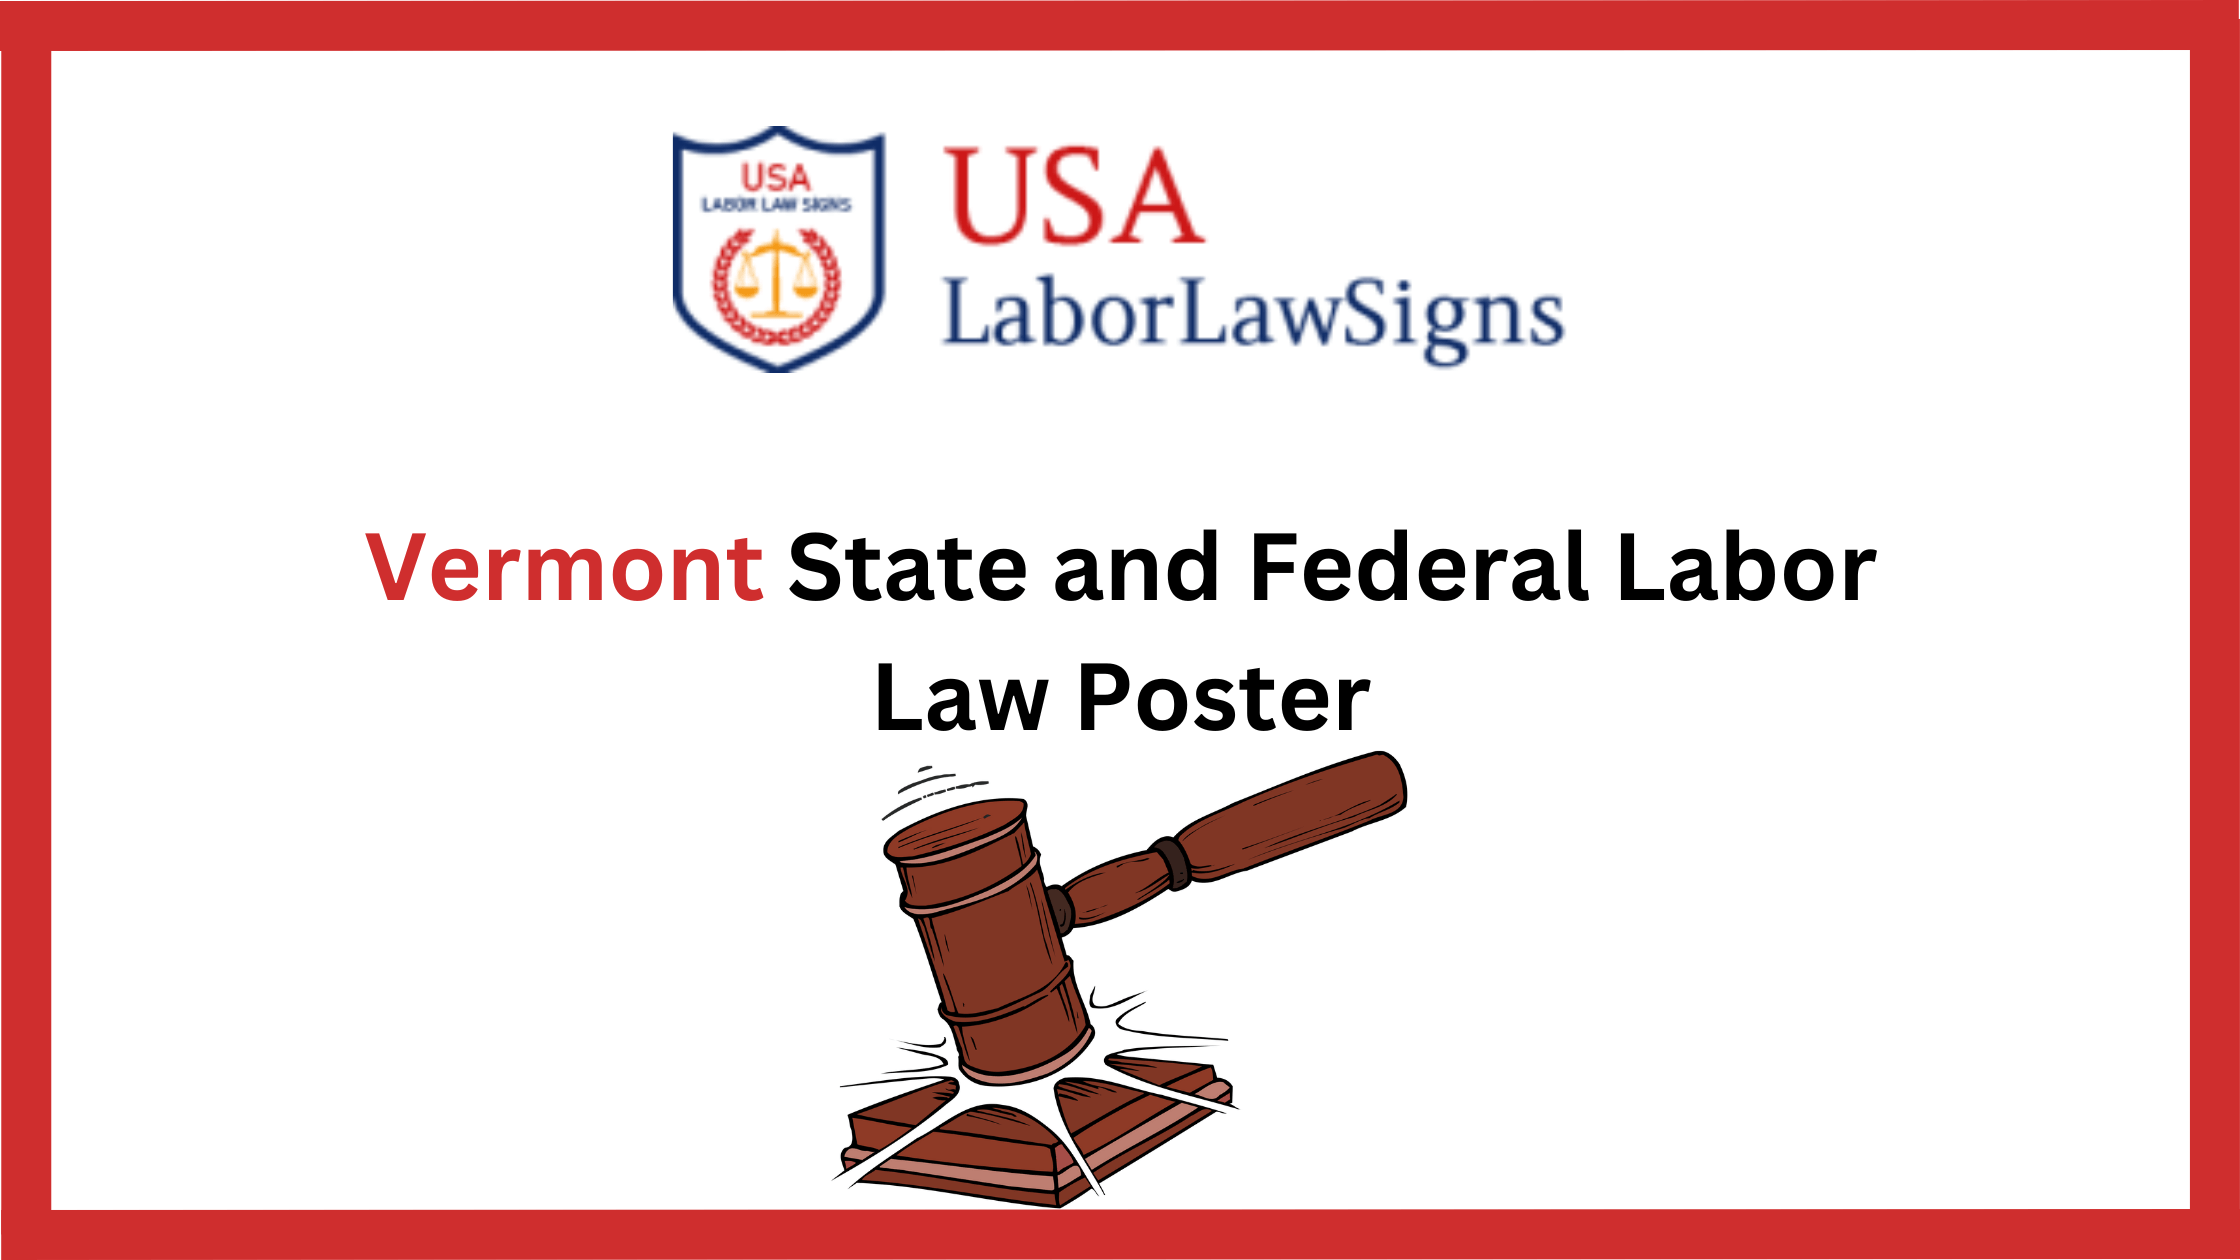 Key Features of Vermont State and Federal Labor Law Poster